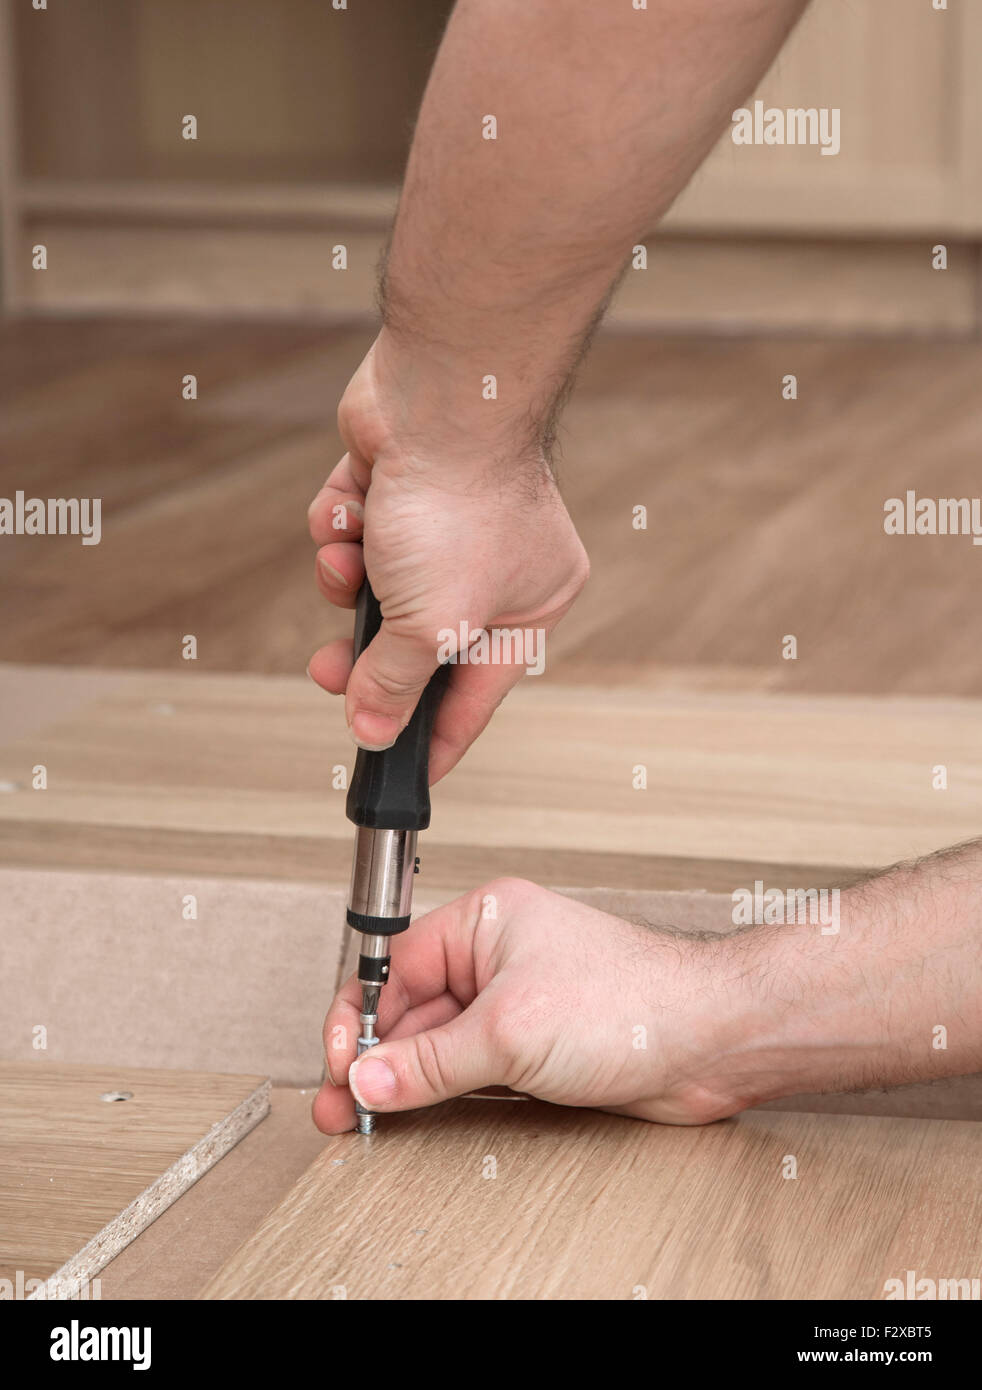 Hands with a screwdriver Stock Photo